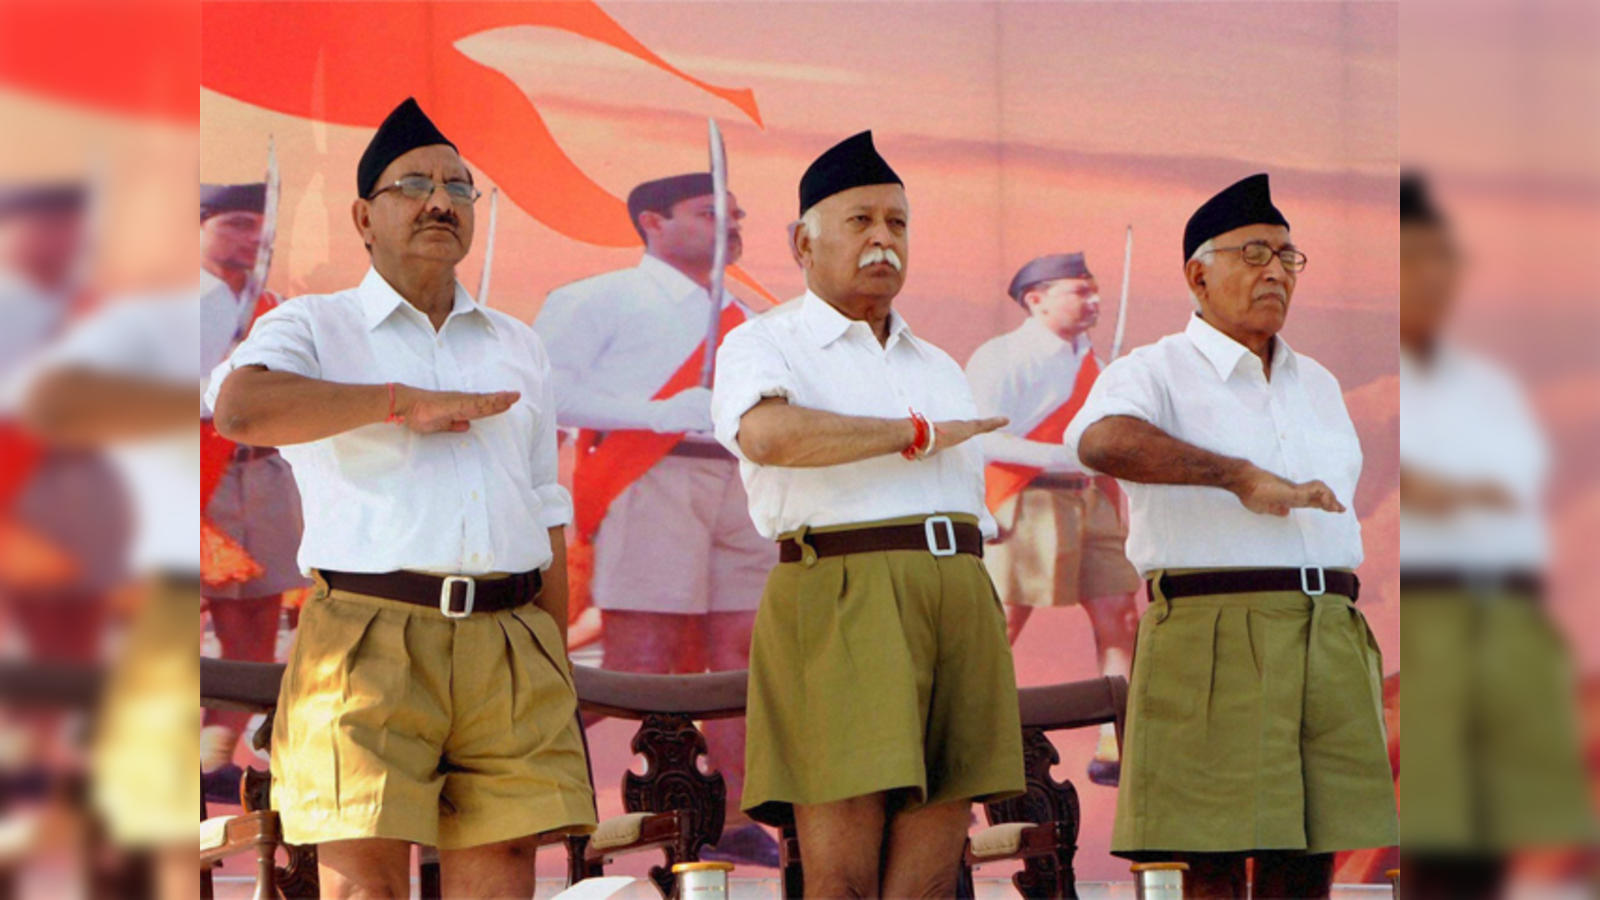 keeping it fashionable trousers will be tailormade for obese or slim rss swayamsevaks